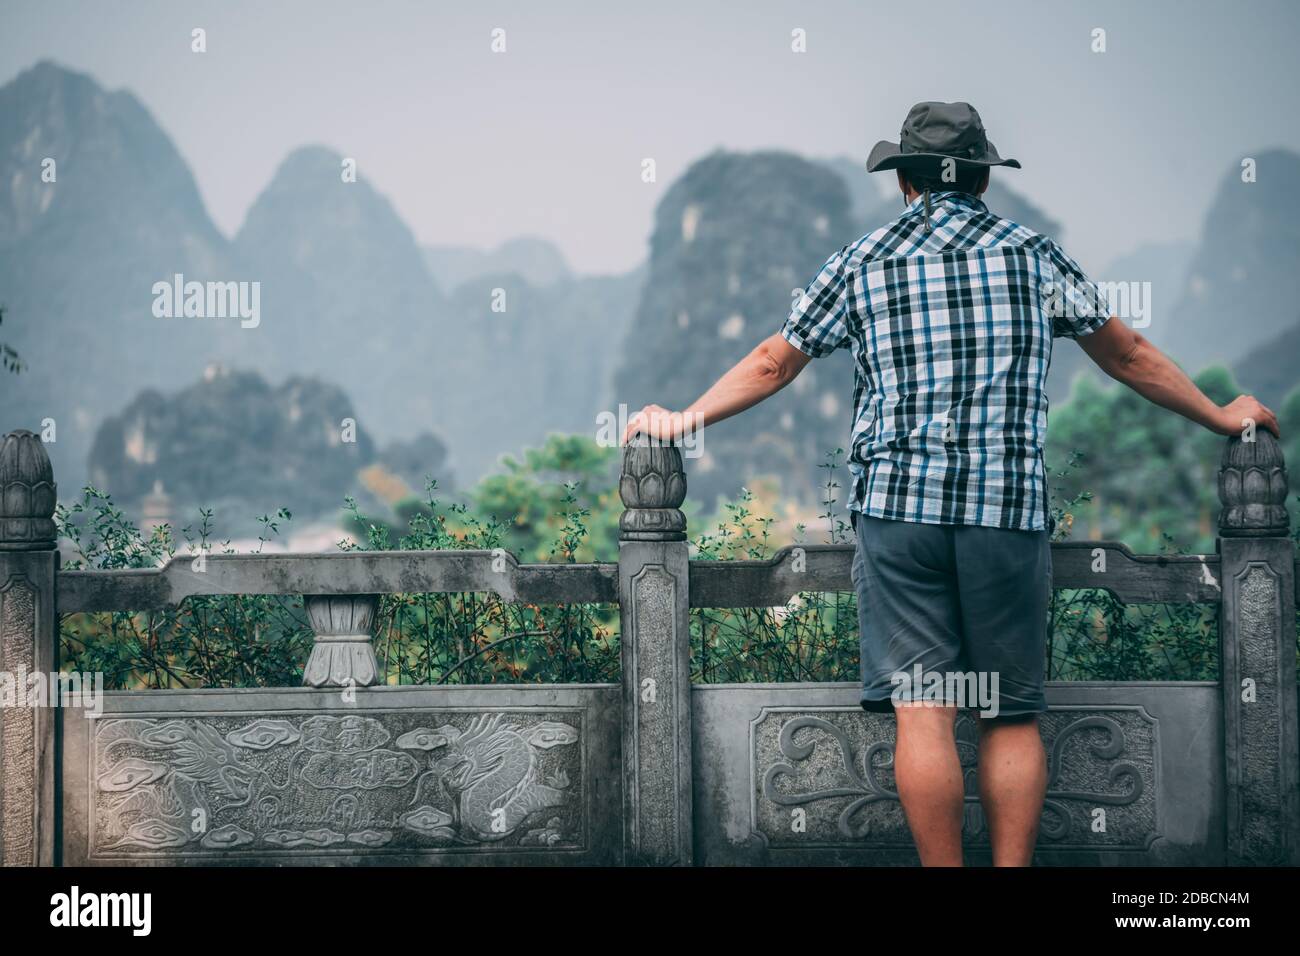 A view of a male laying on the fence and enjoying the beautiful view of the karst mountains in Yangshuo in the morning Stock Photo